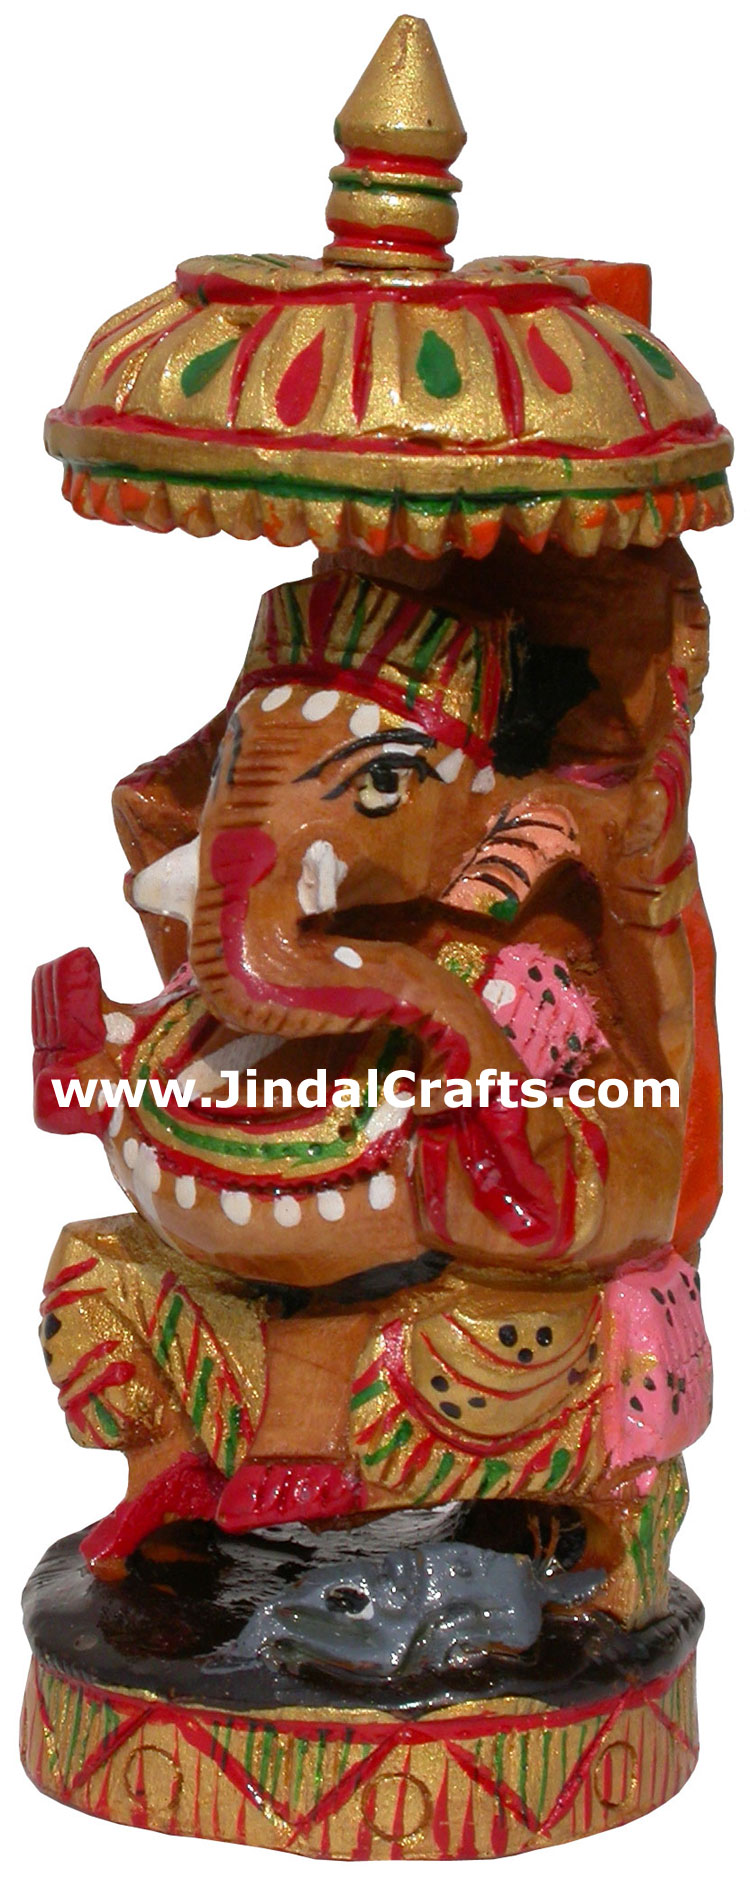 Handmade wooden carved painted Lord Ganesha India Arts